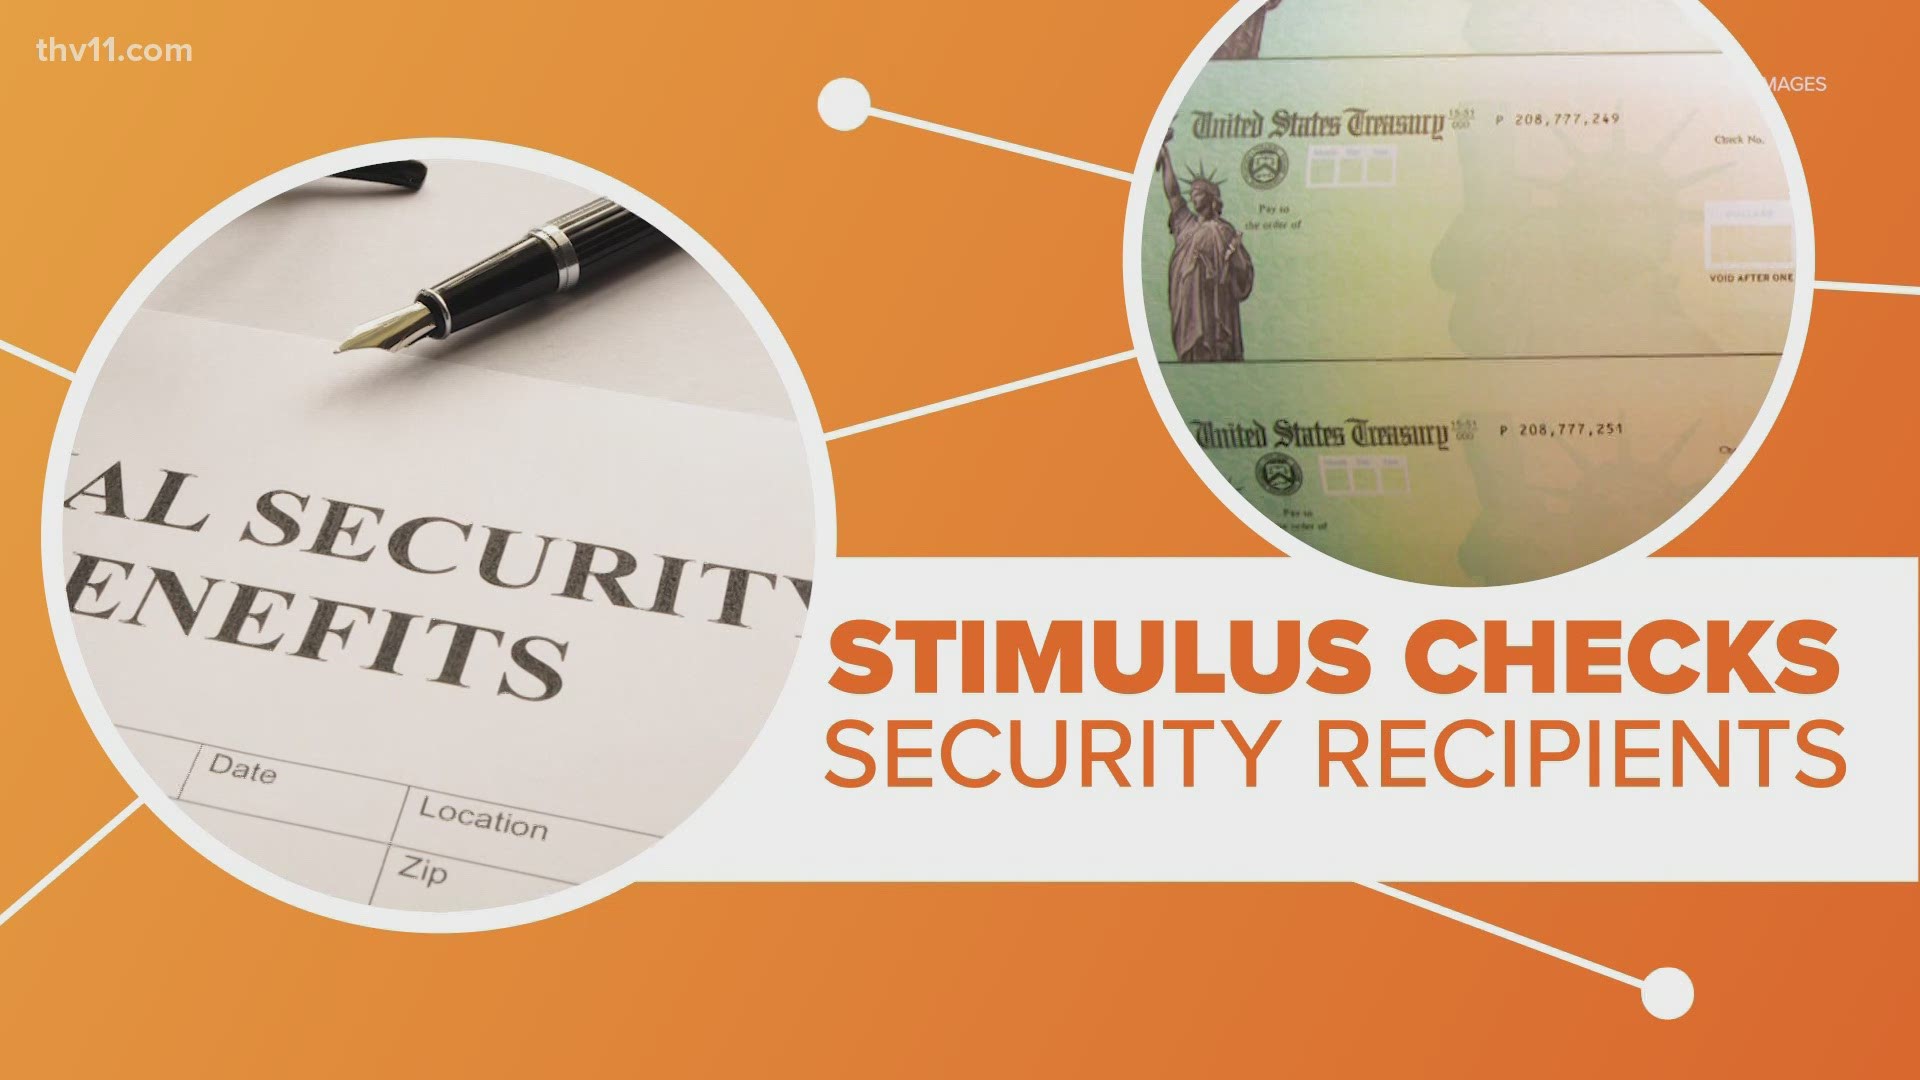 If you receive social security benefits, your stimulus check is running late. there's been little answers from the IRS about when people can expect their checks.